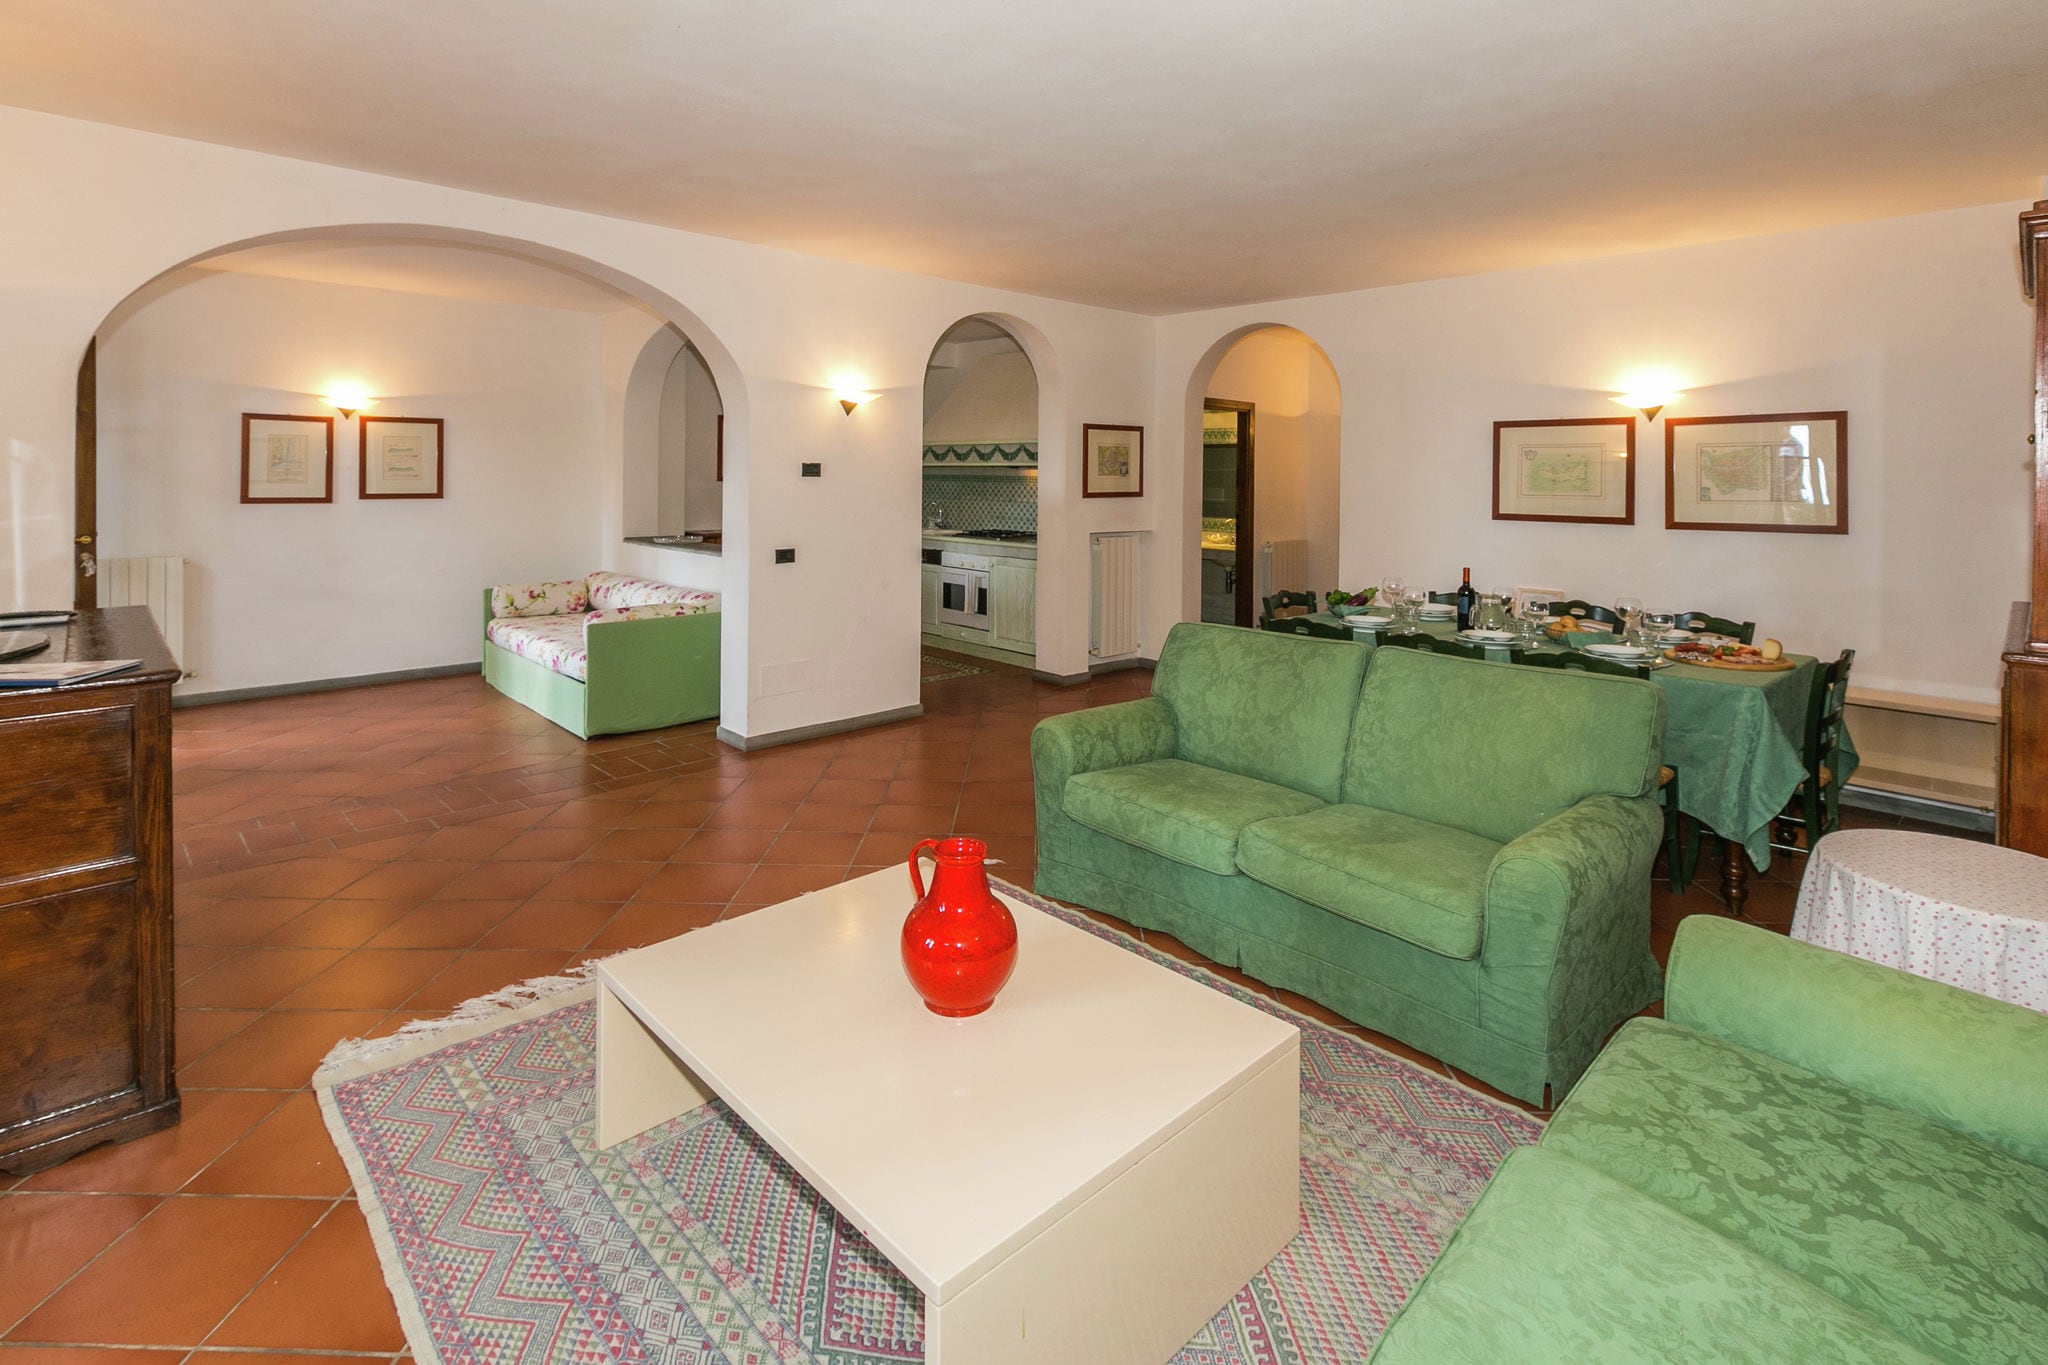 Holiday home 5 km from Sienna in the hills, swimming pool and garden